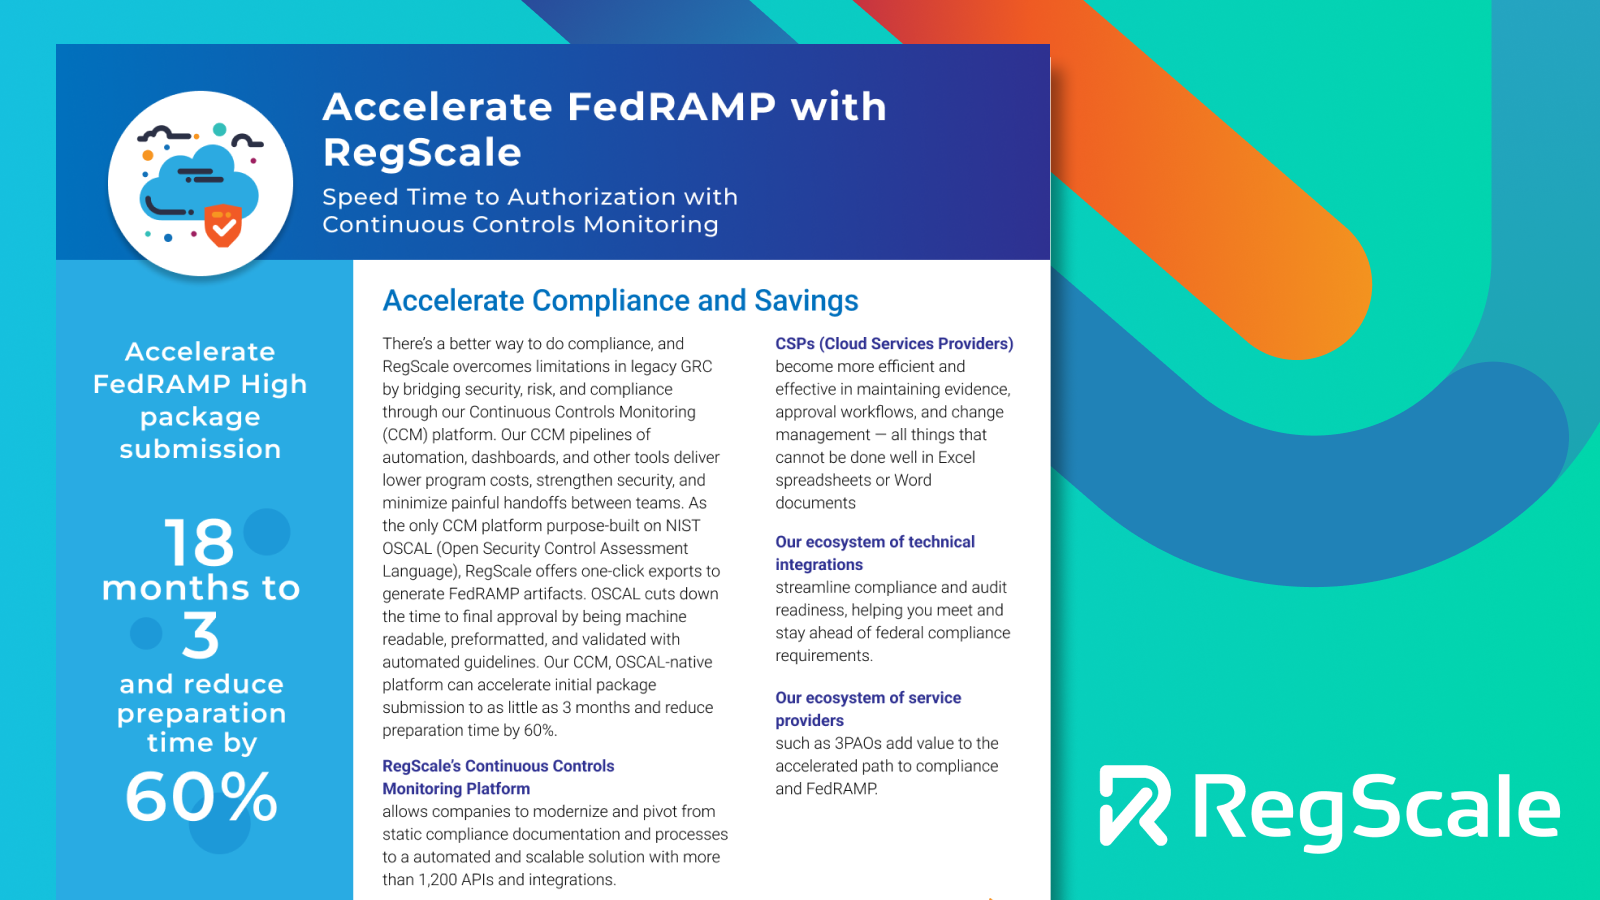 Accelerate FedRAMP with RegScale